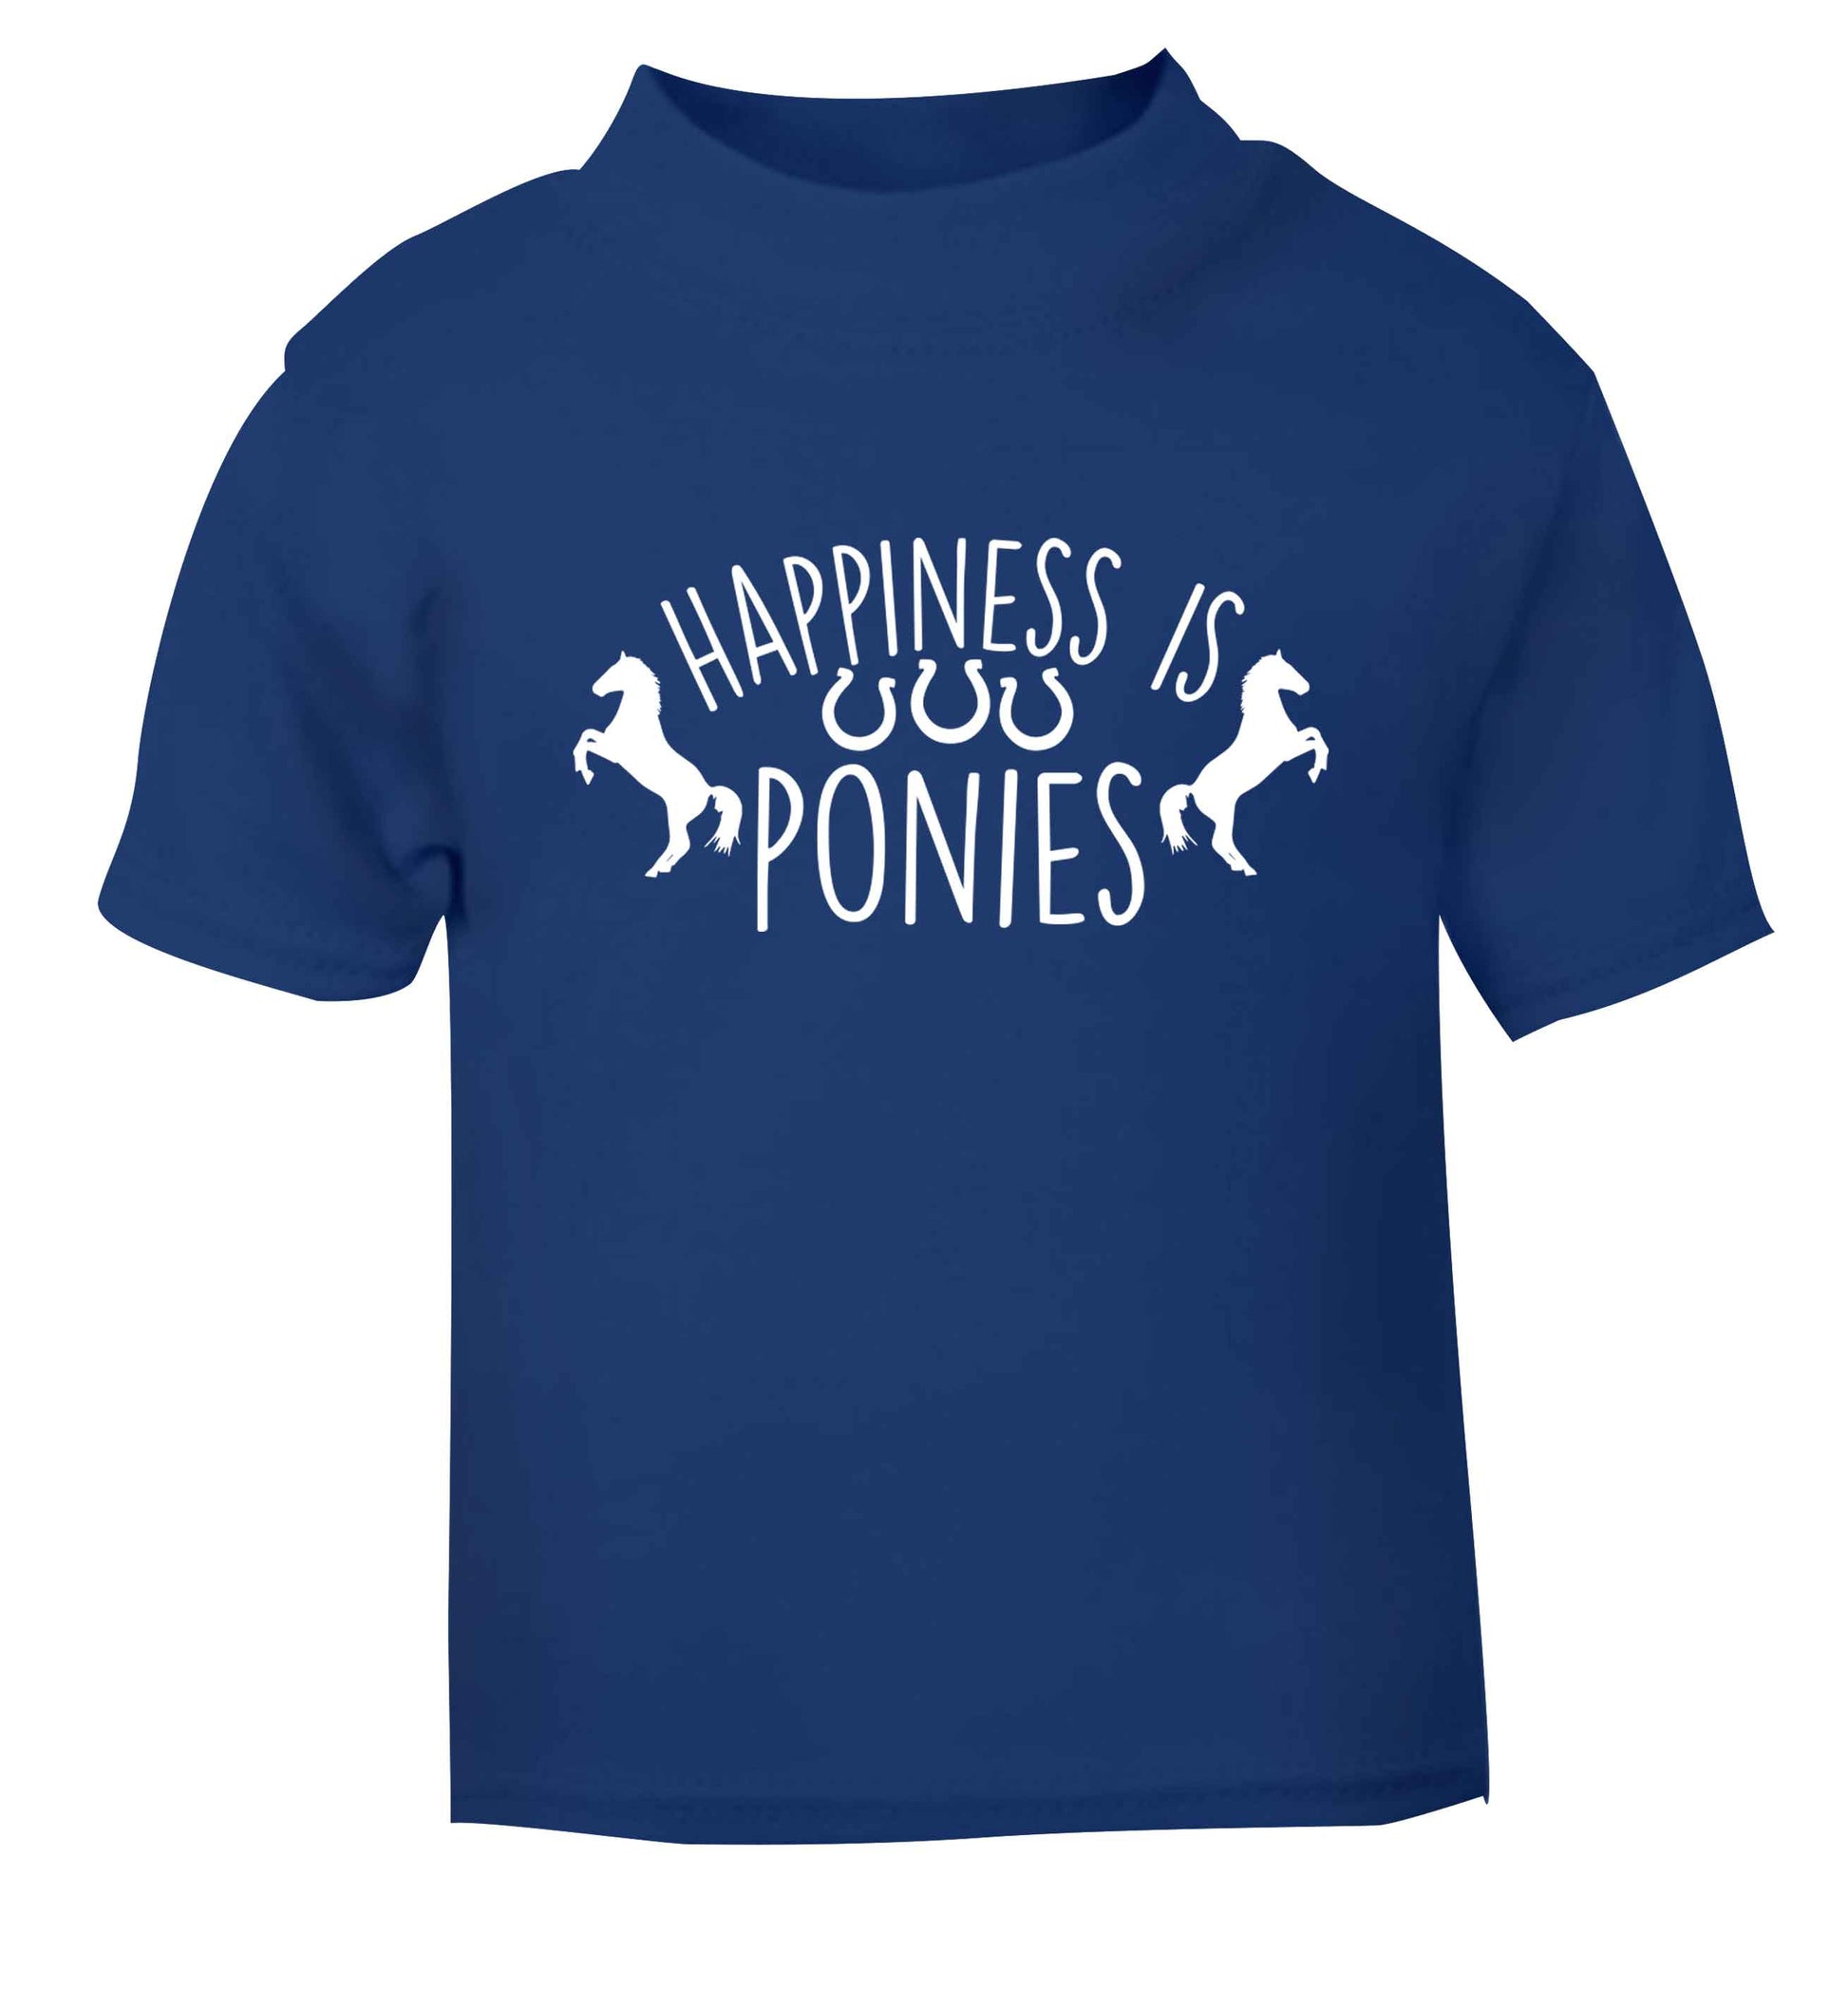 Happiness is ponies blue baby toddler Tshirt 2 Years